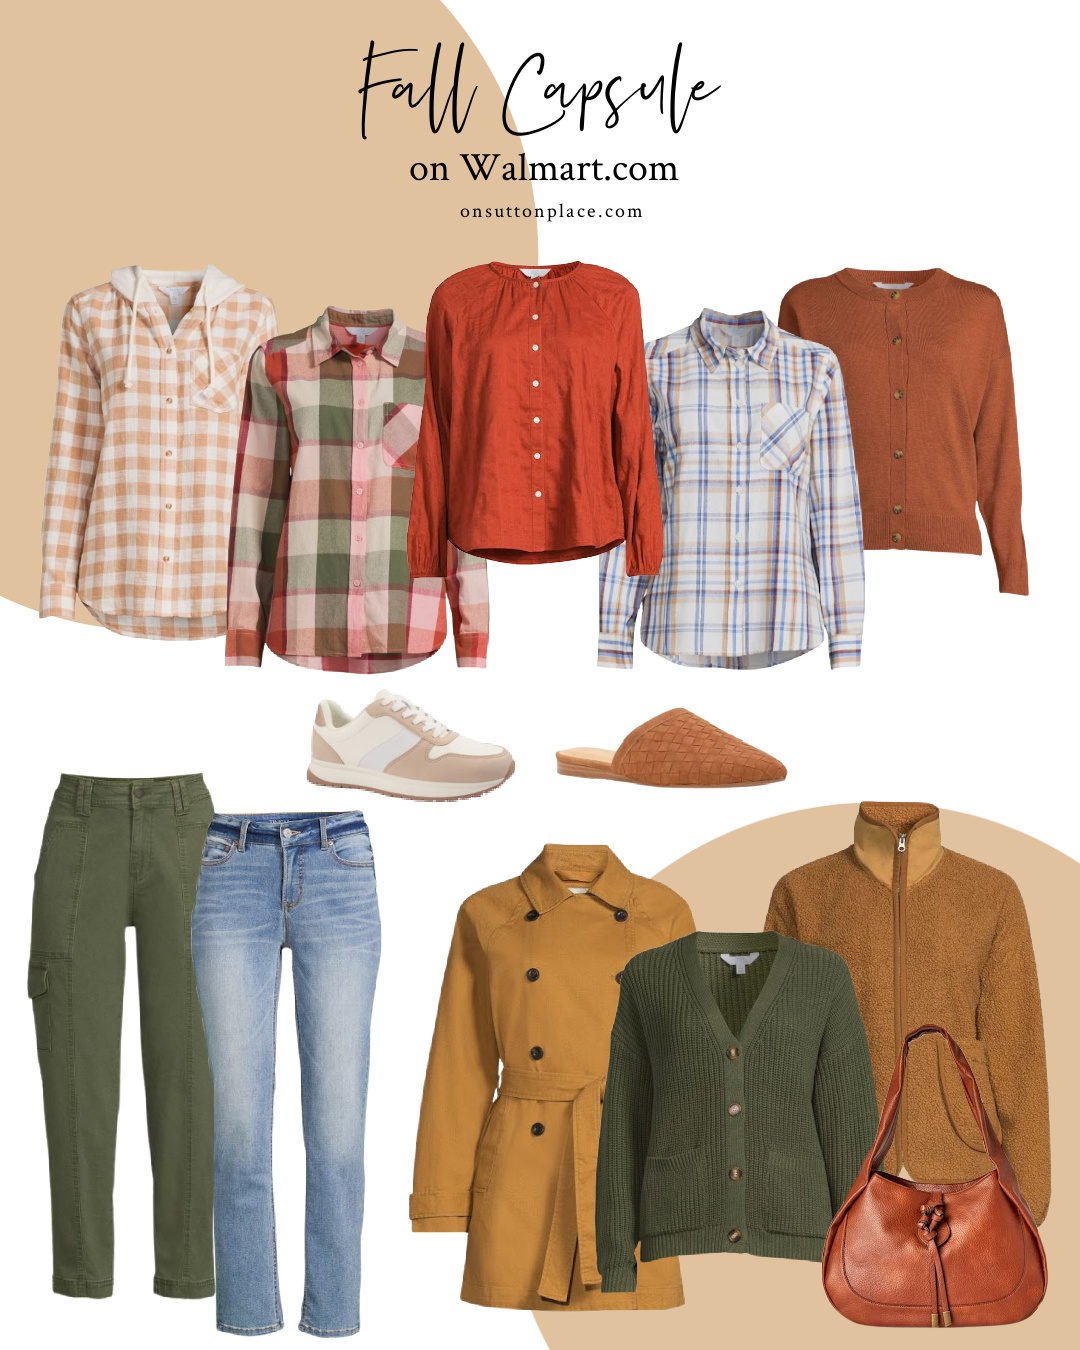 Fall Capsule Wardrobe: On Trend Mix and Match Fall Outfit Ideas